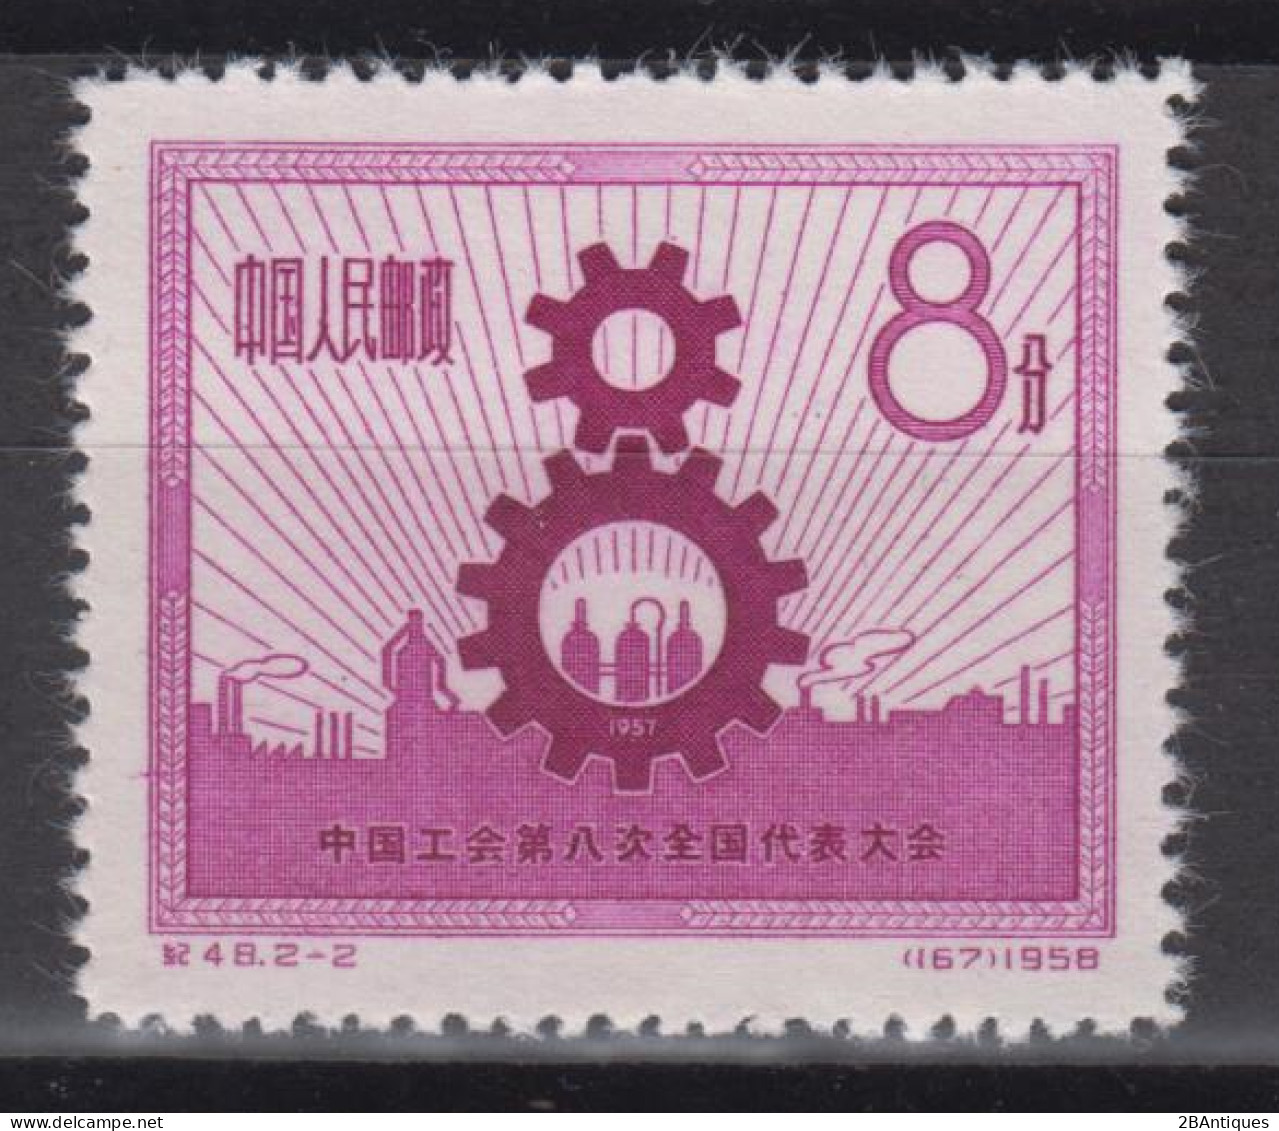 PR CHINA 1958 - The 8th All-China Trade Union Congress, Beijing MNH** - Unused Stamps